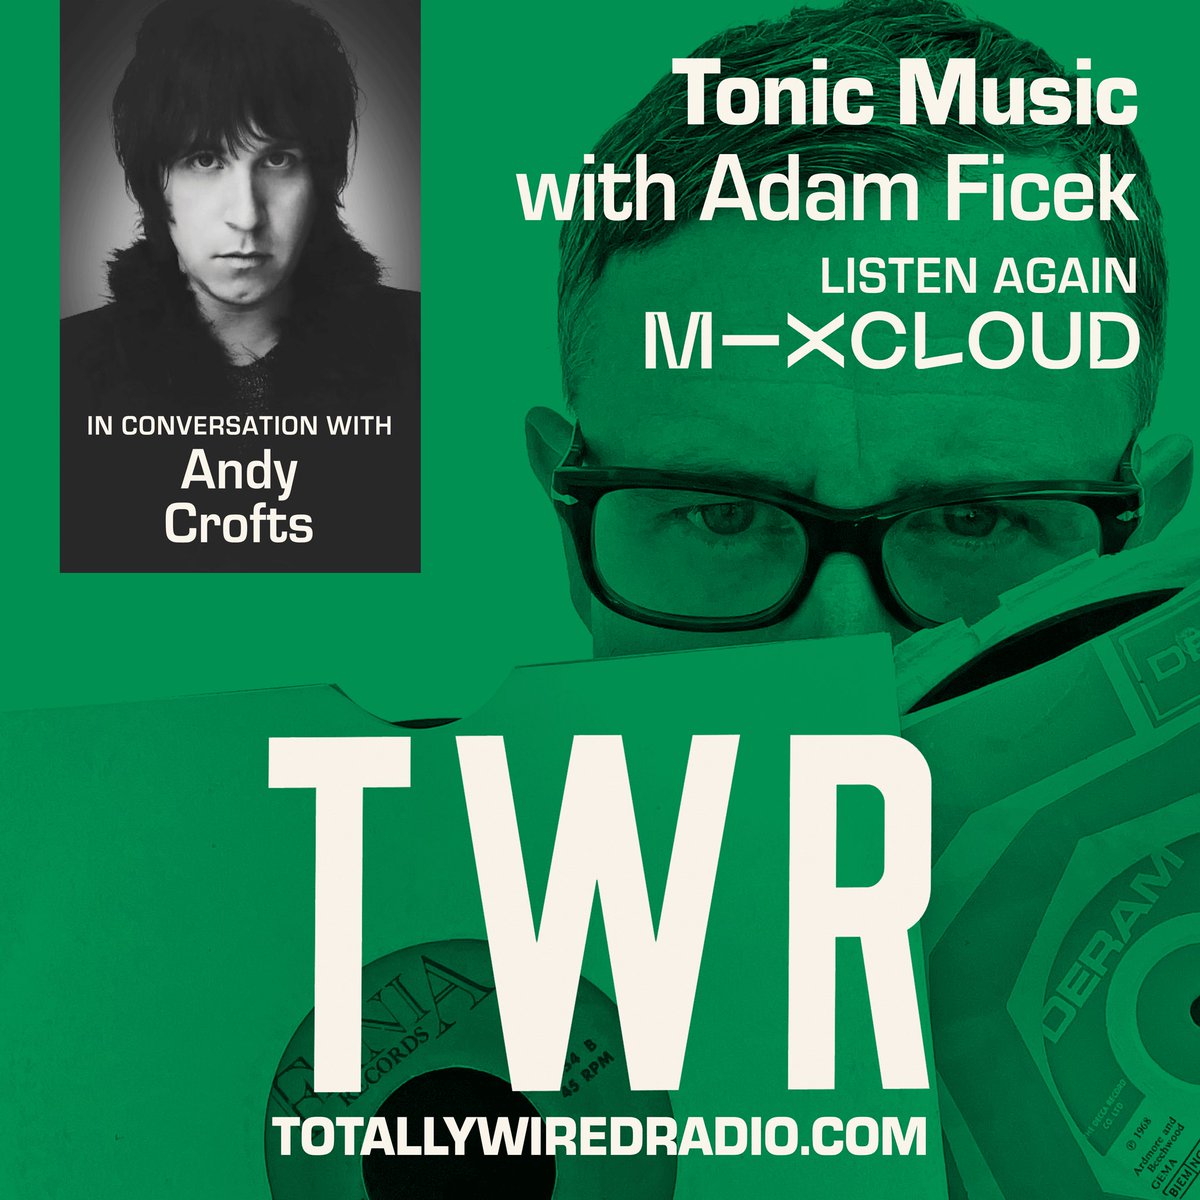 For those interested here’s a recent chat I had with @adamficek (Babyshambles) for @tonicmusicmh on @TotallyWiredRAD Listen from 59:00 m.mixcloud.com/Tonic_Music_fo…